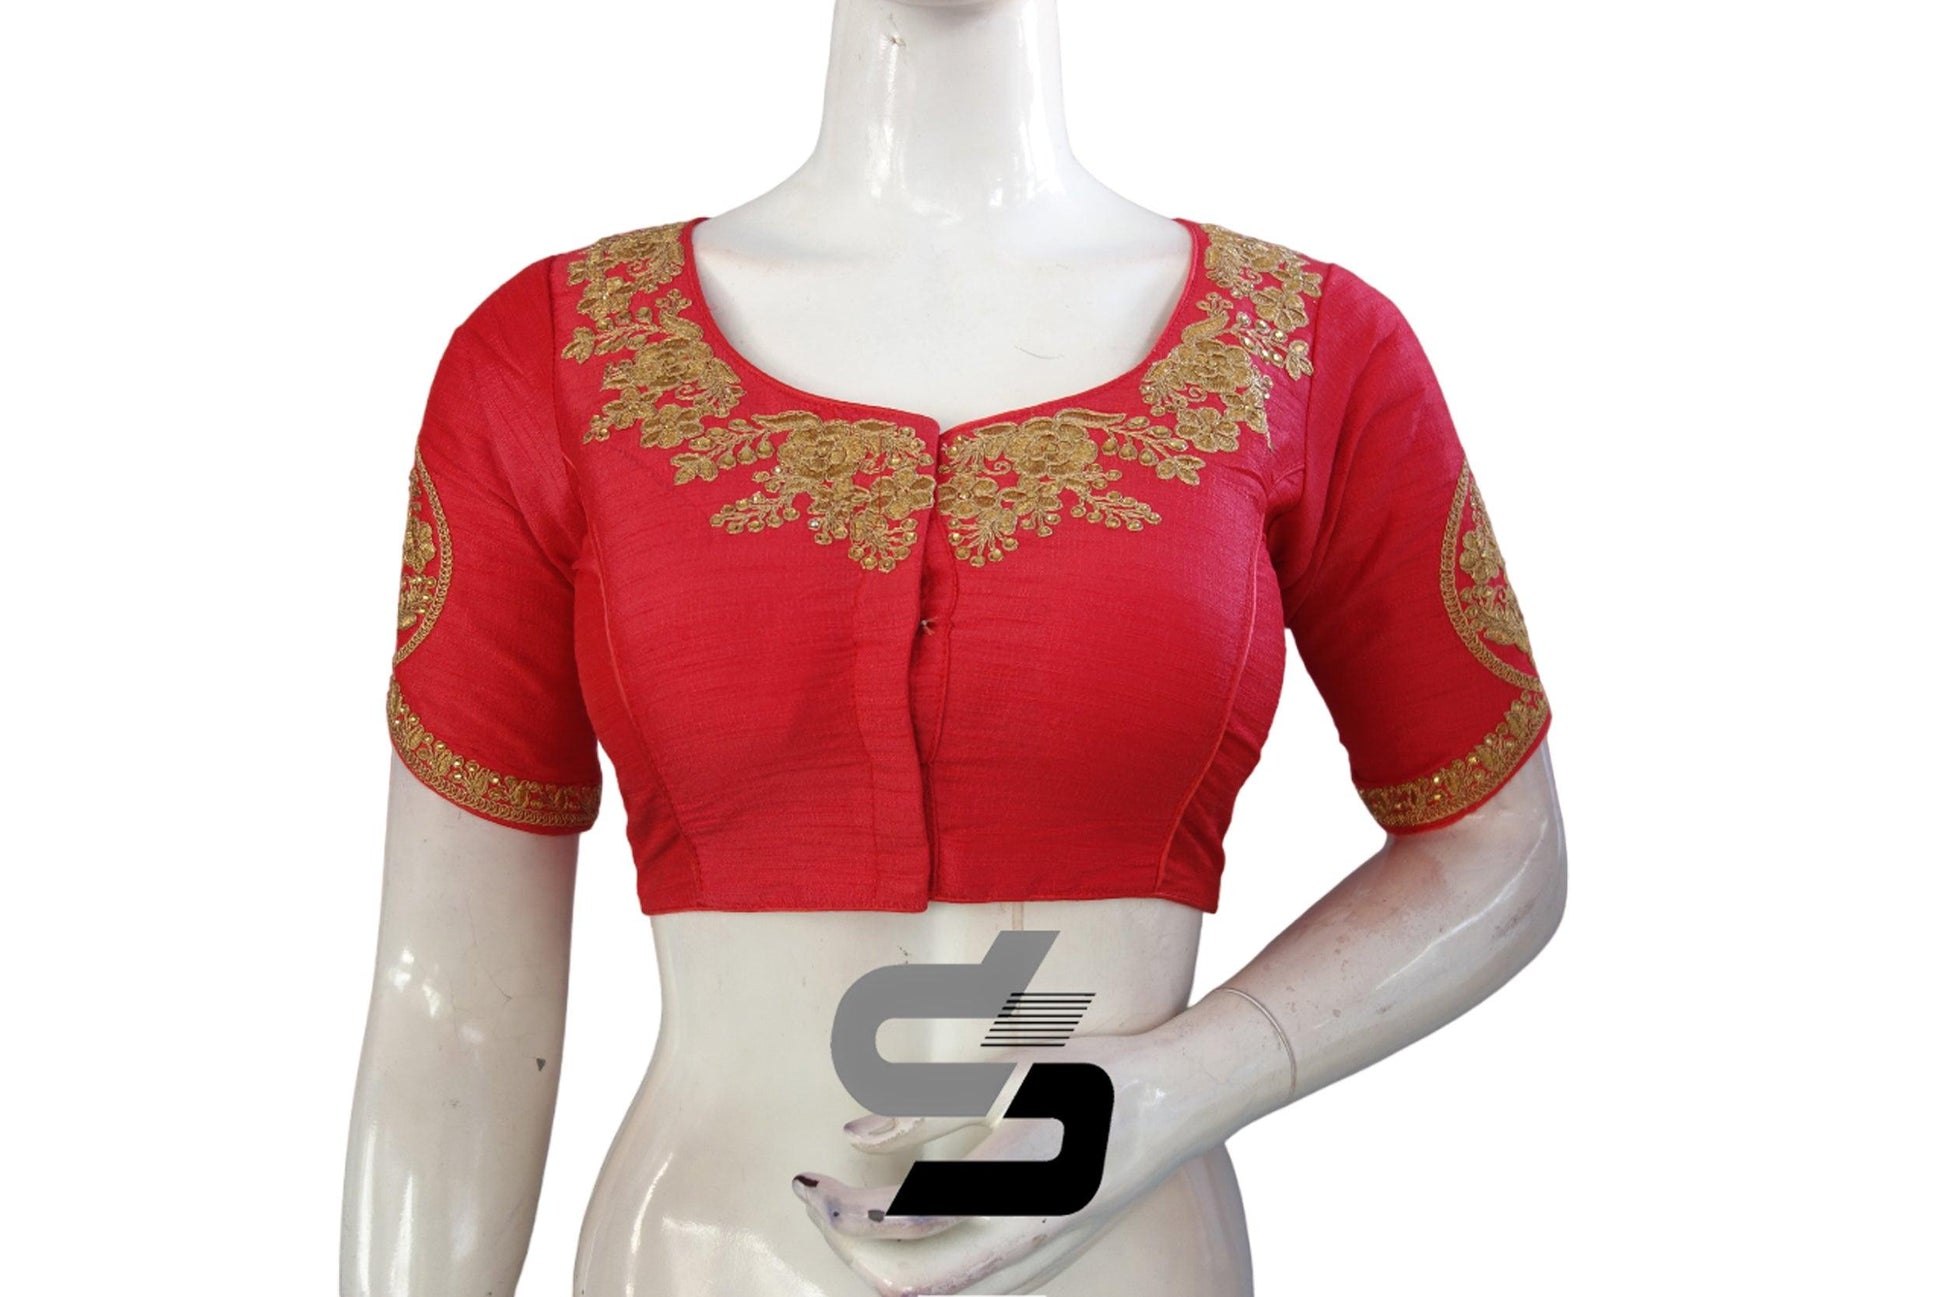 Pink Color High Neck Designer Embroidery Readymade Saree Blouses,Bring a vibrant and energetic element to your look. - D3blouses